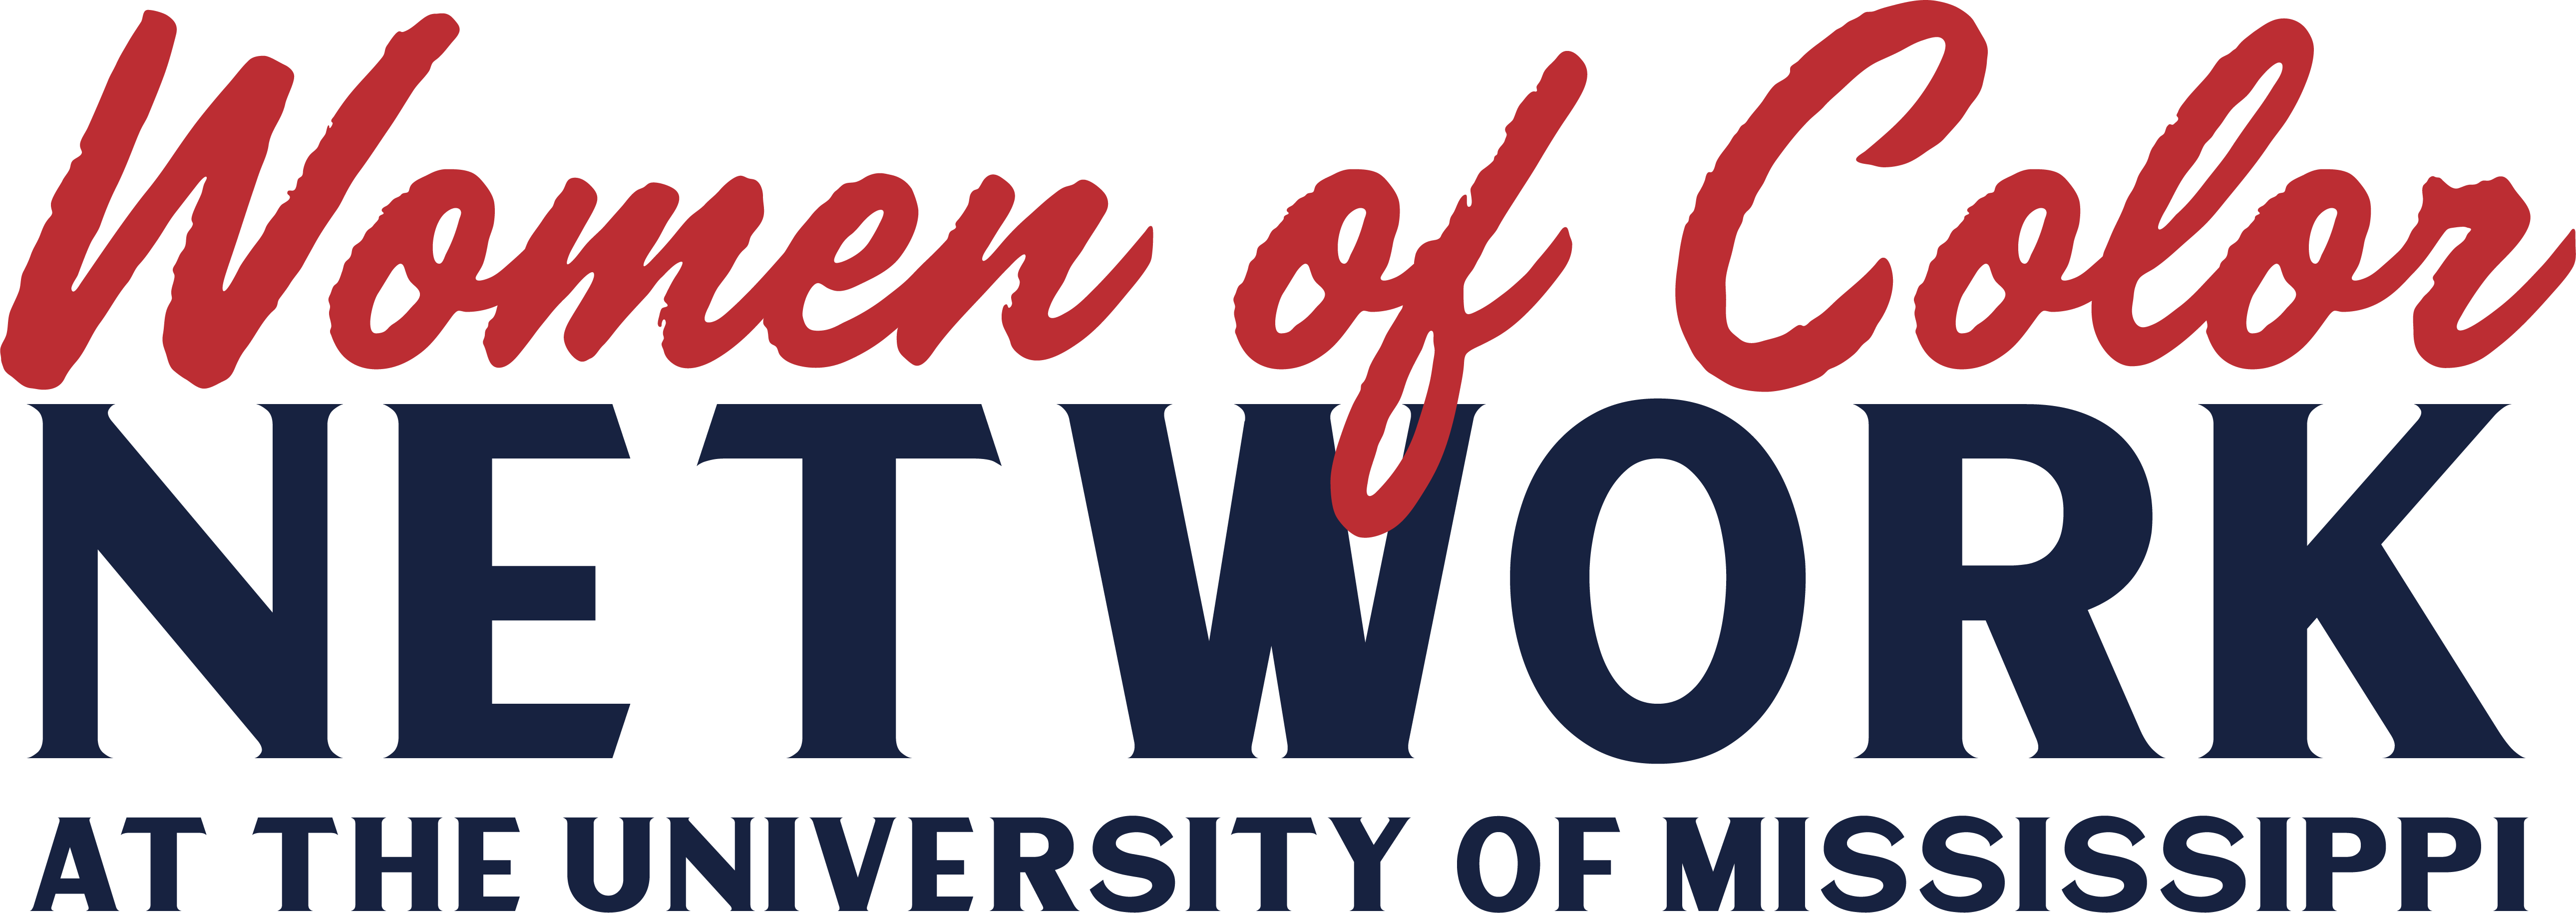 Women of Color NETWORK AT THE UNIVERSITY OF MISSISSIPPI logo